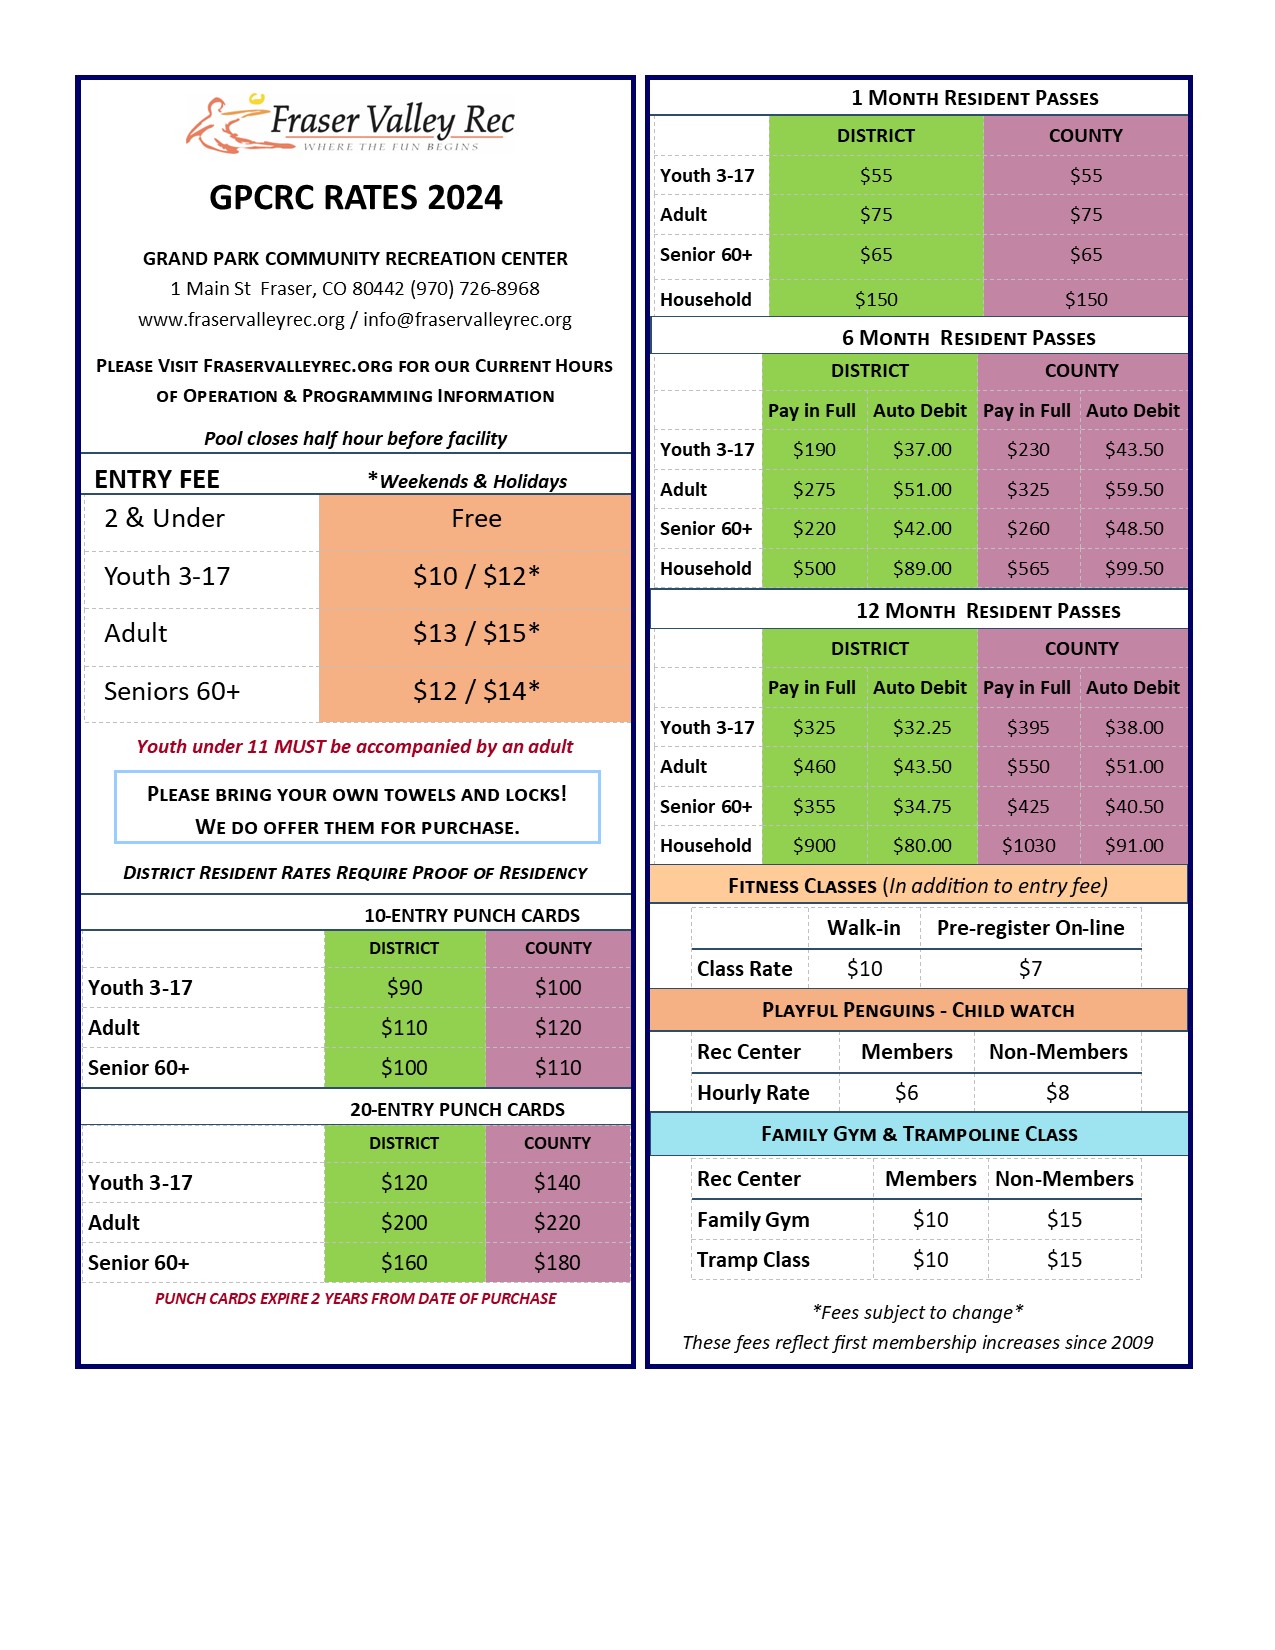 An image of a rate sheet for Fraser Valley Rec, detailing various membership and pass prices for different age groups, residents, and non-residents. The document lists entry fees, rates for 1, 6, and 12-month passes, punch card prices, and additional charges for fitness classes and child watch services. The fee structure is color-coded to distinguish between district and county residents, with a note that proof of residency is required for district rates.